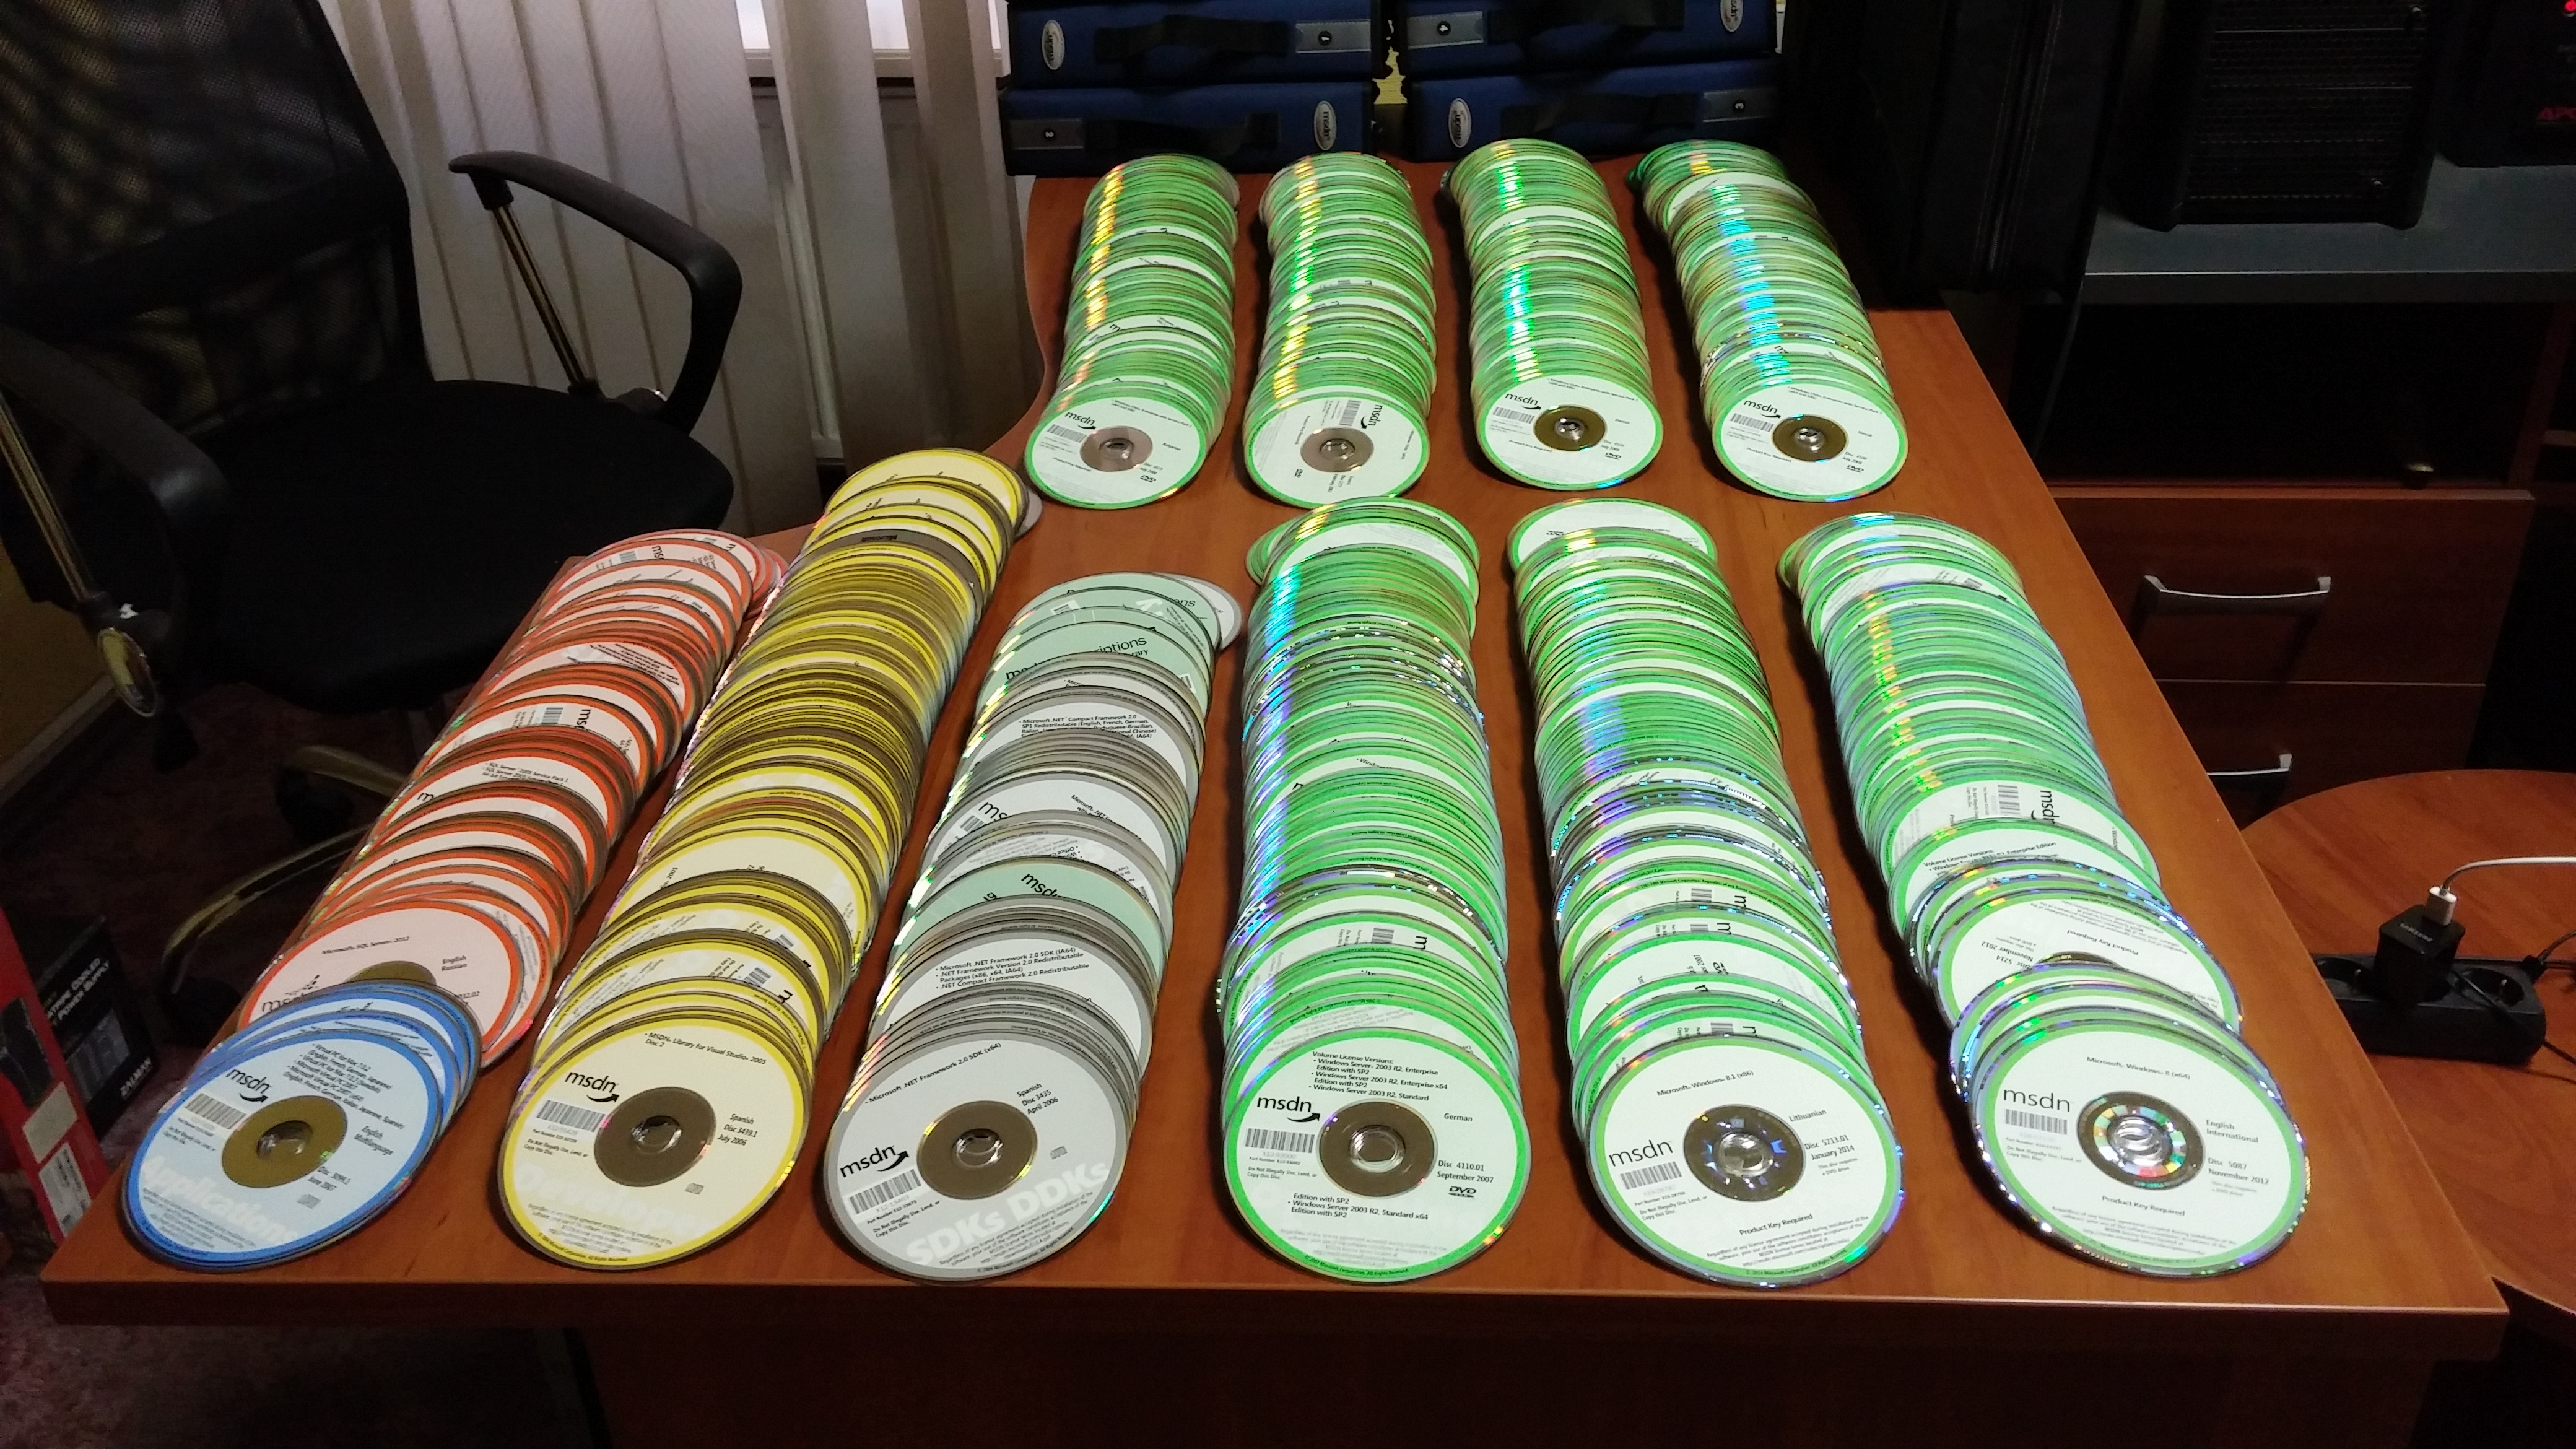 More than 1500 MSDN disks, zoom out